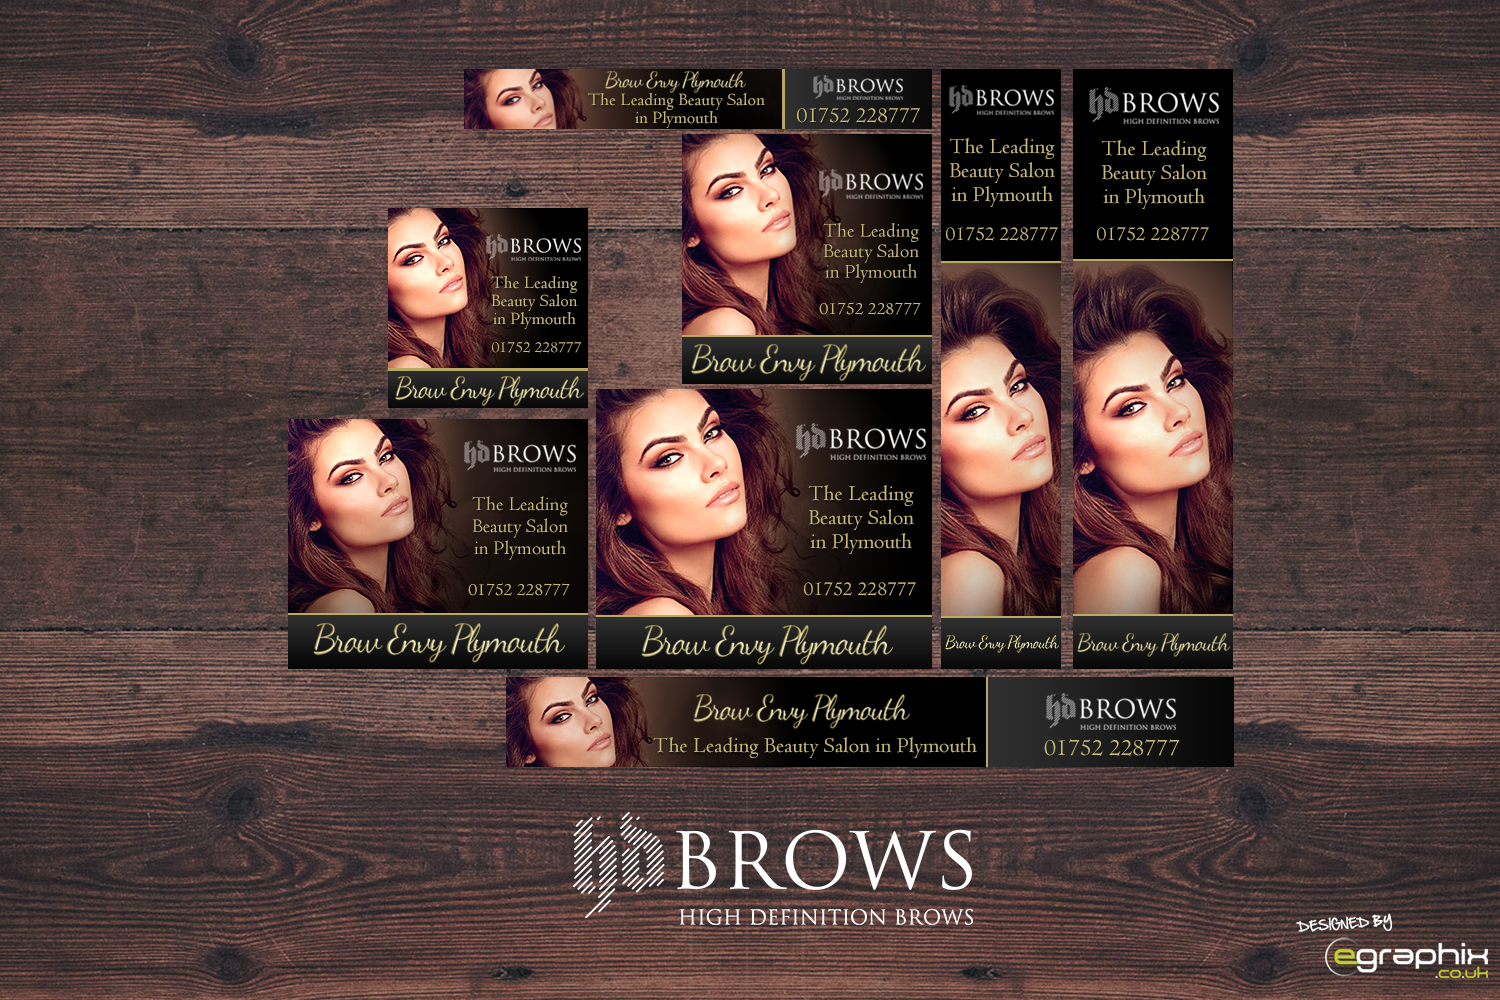 HD Brows Plymouth Remarketing Ads